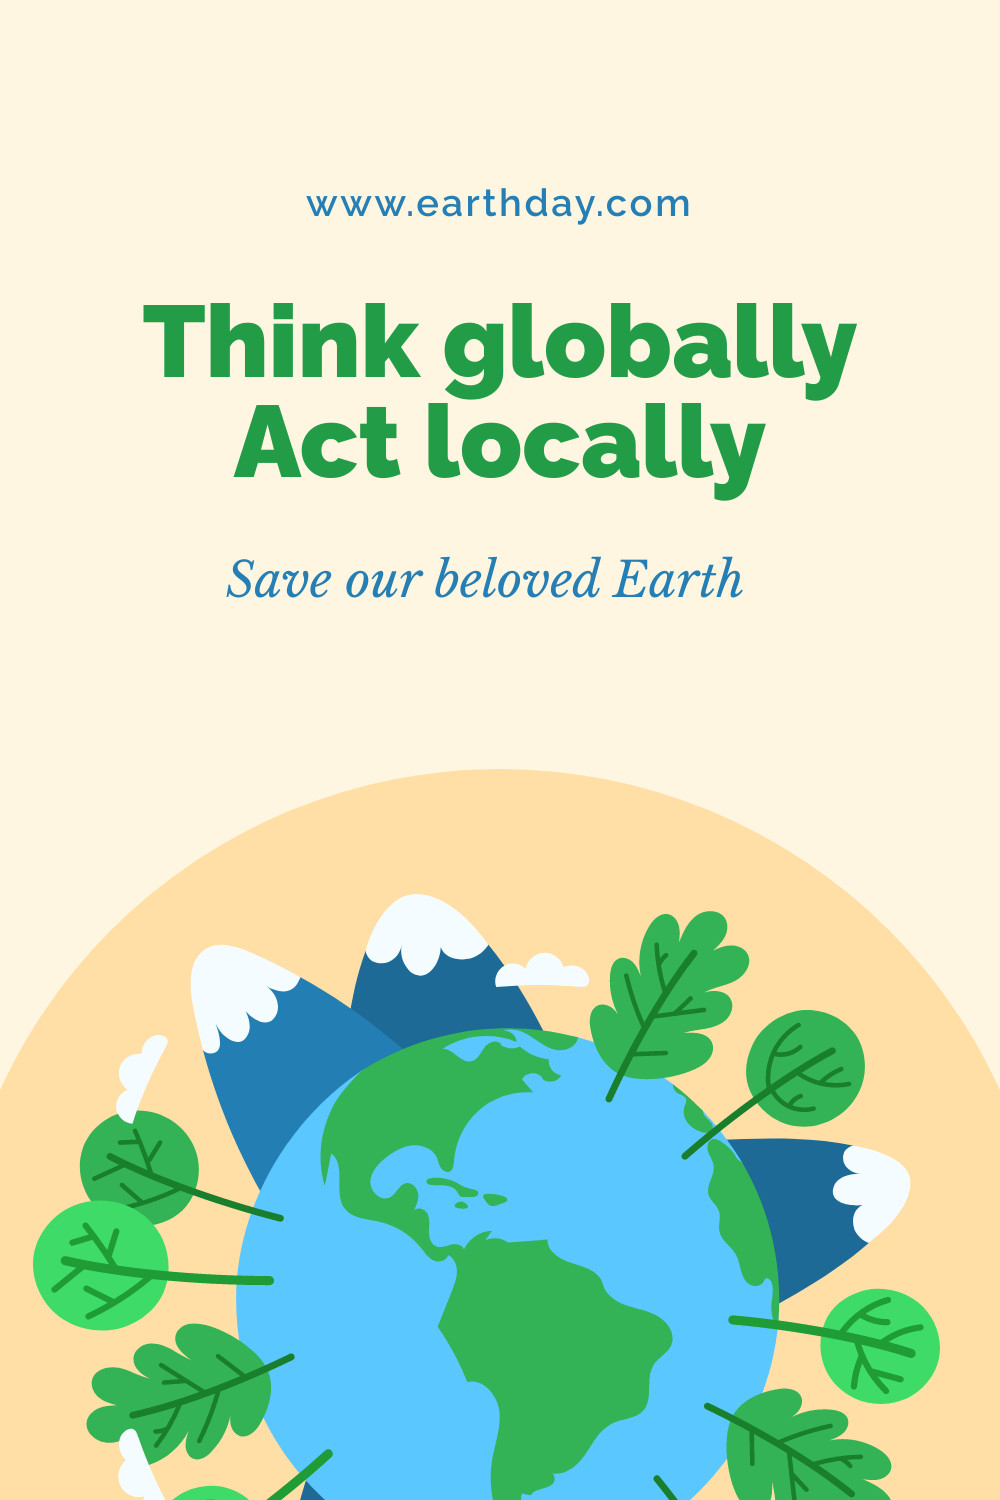 Earth Day Think Globally and Act Locally Facebook Cover 820x360